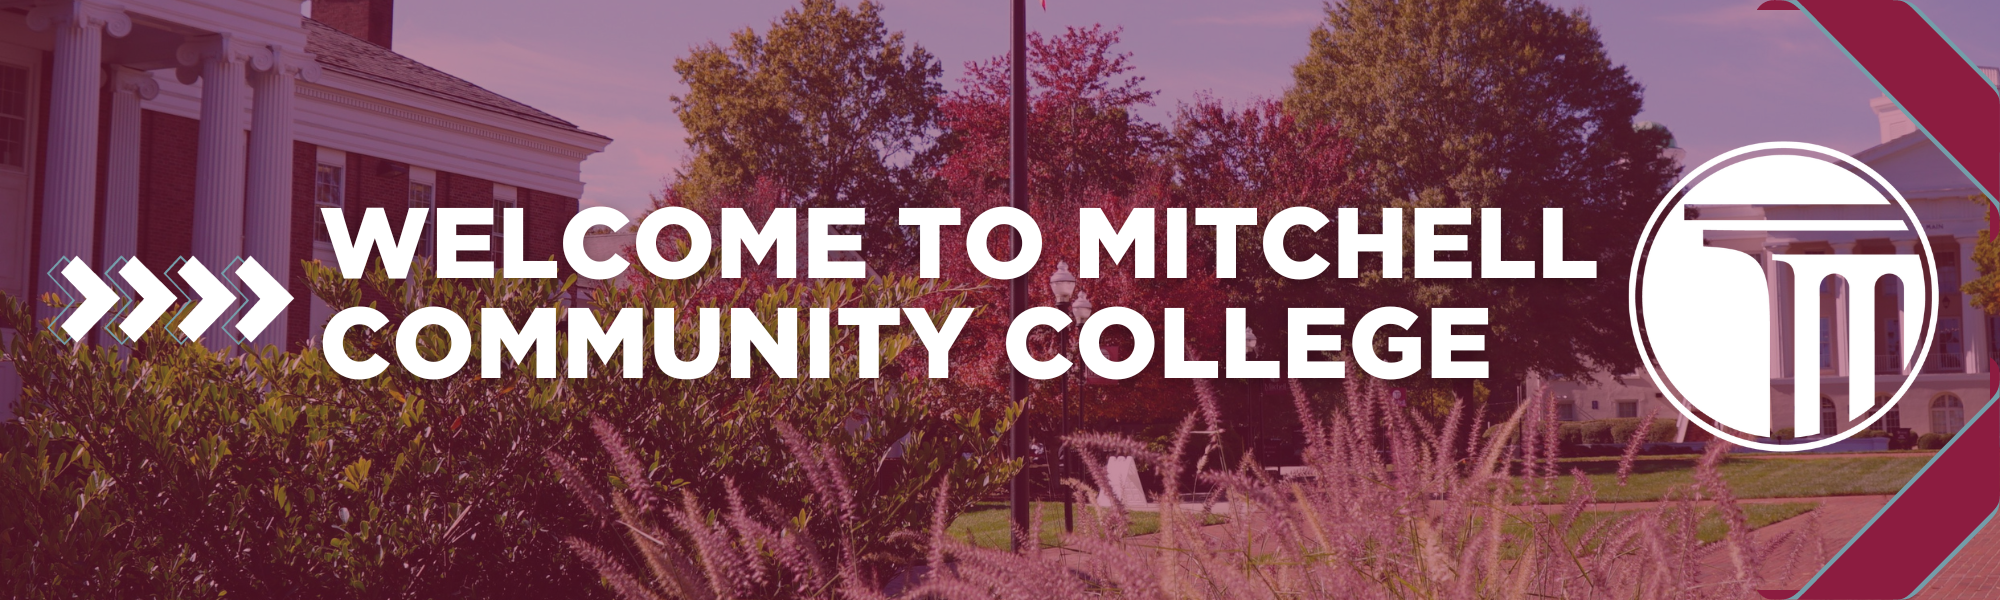 Banner that reads "Welcome to Mitchell Community College".